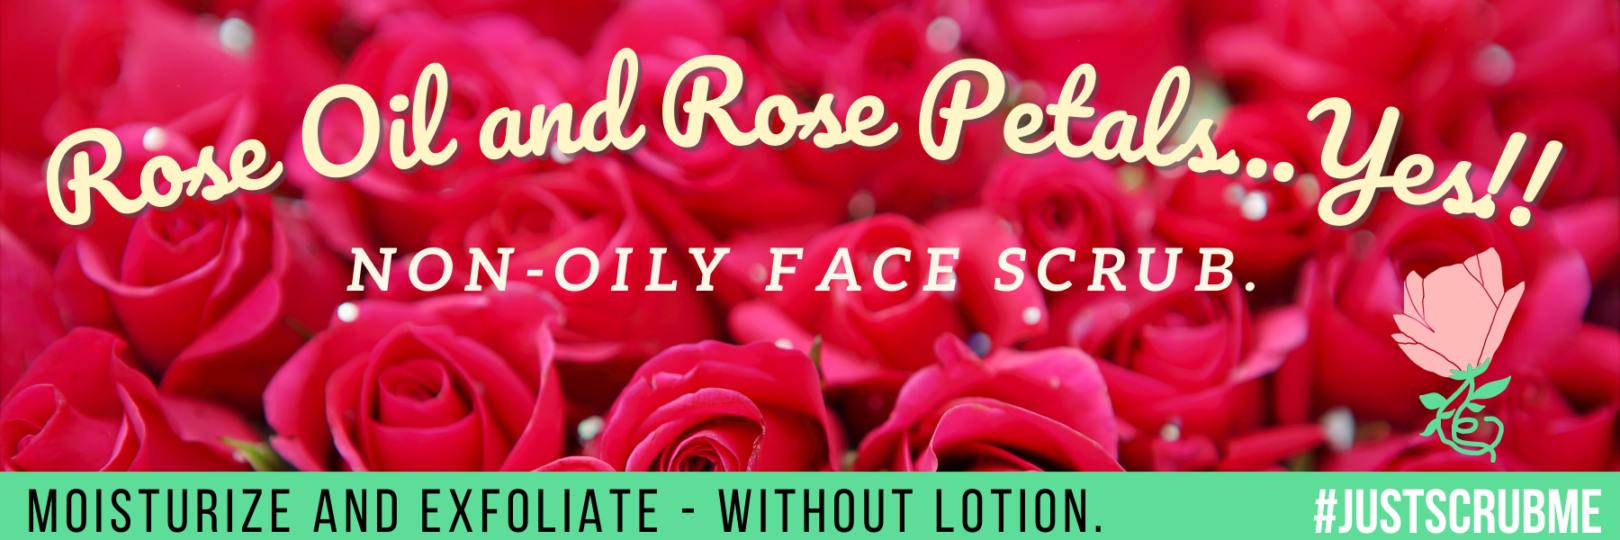 Rose Oil and Rose Petals...Yes!!